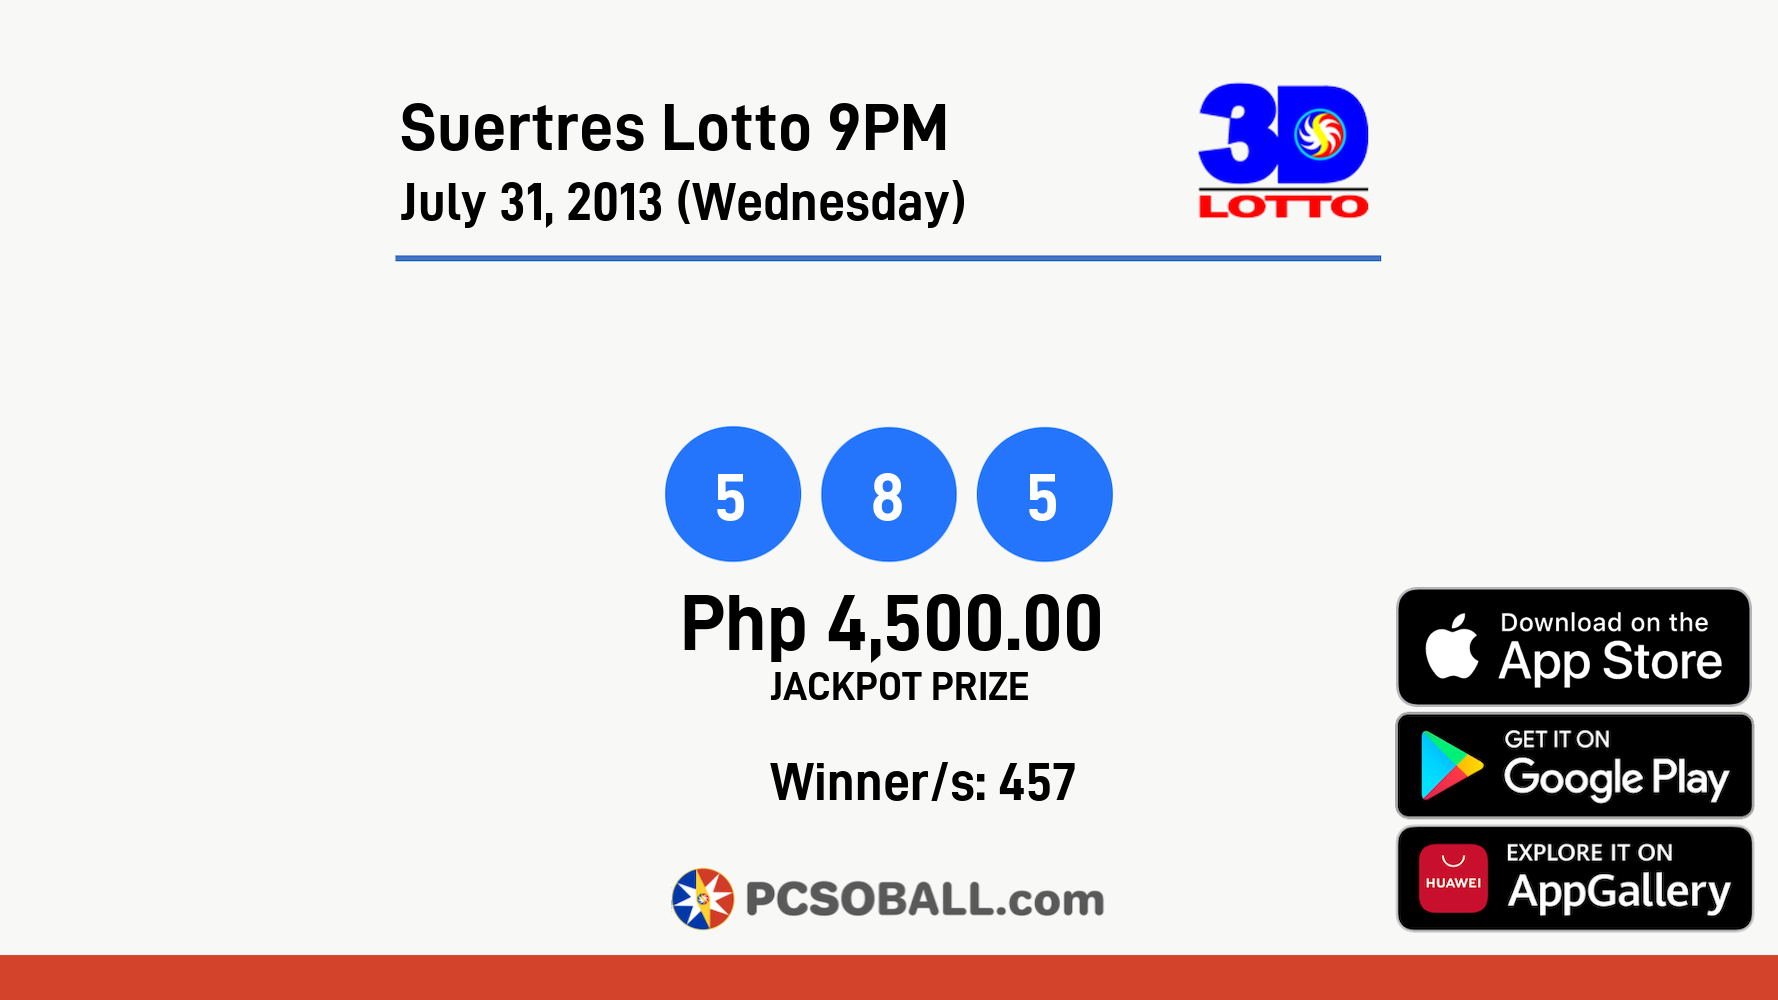 Suertres Lotto 9PM July 31, 2013 (Wednesday) Result